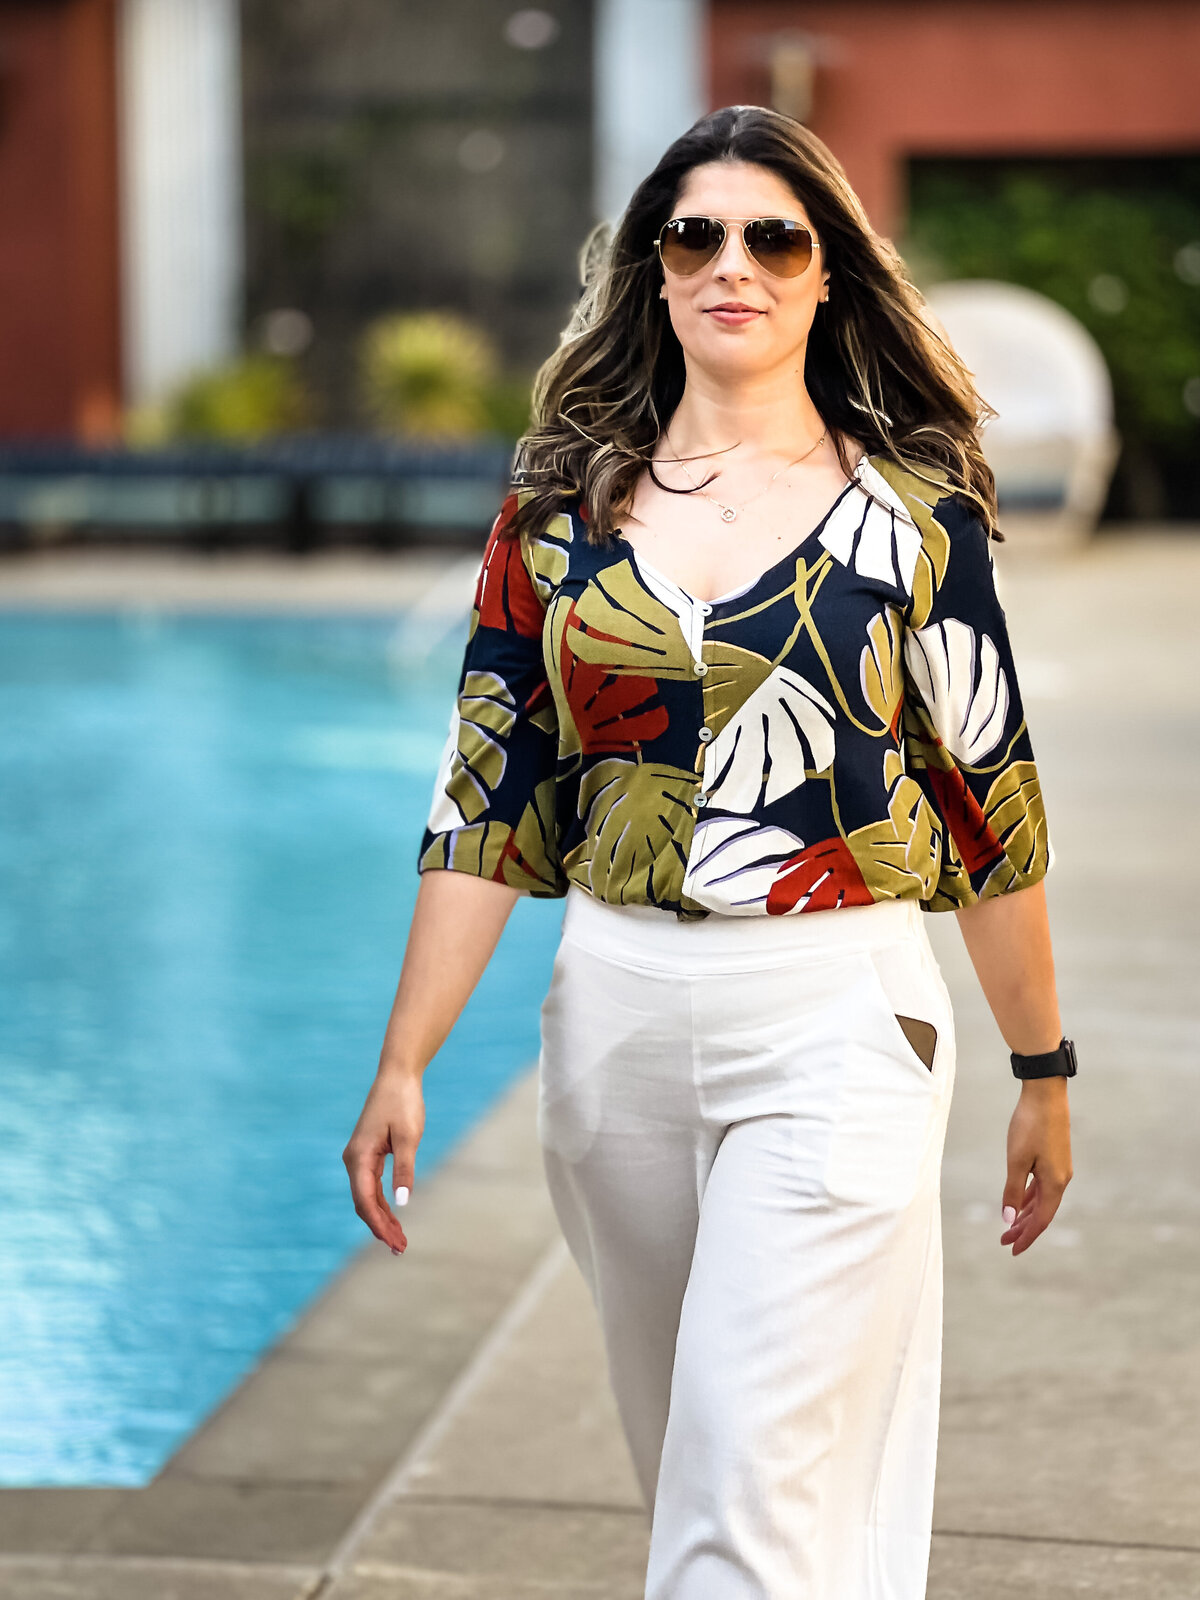 brand photo of a Woman walking close to a pool, wearing  a flare white pair of pants and a flower blouse